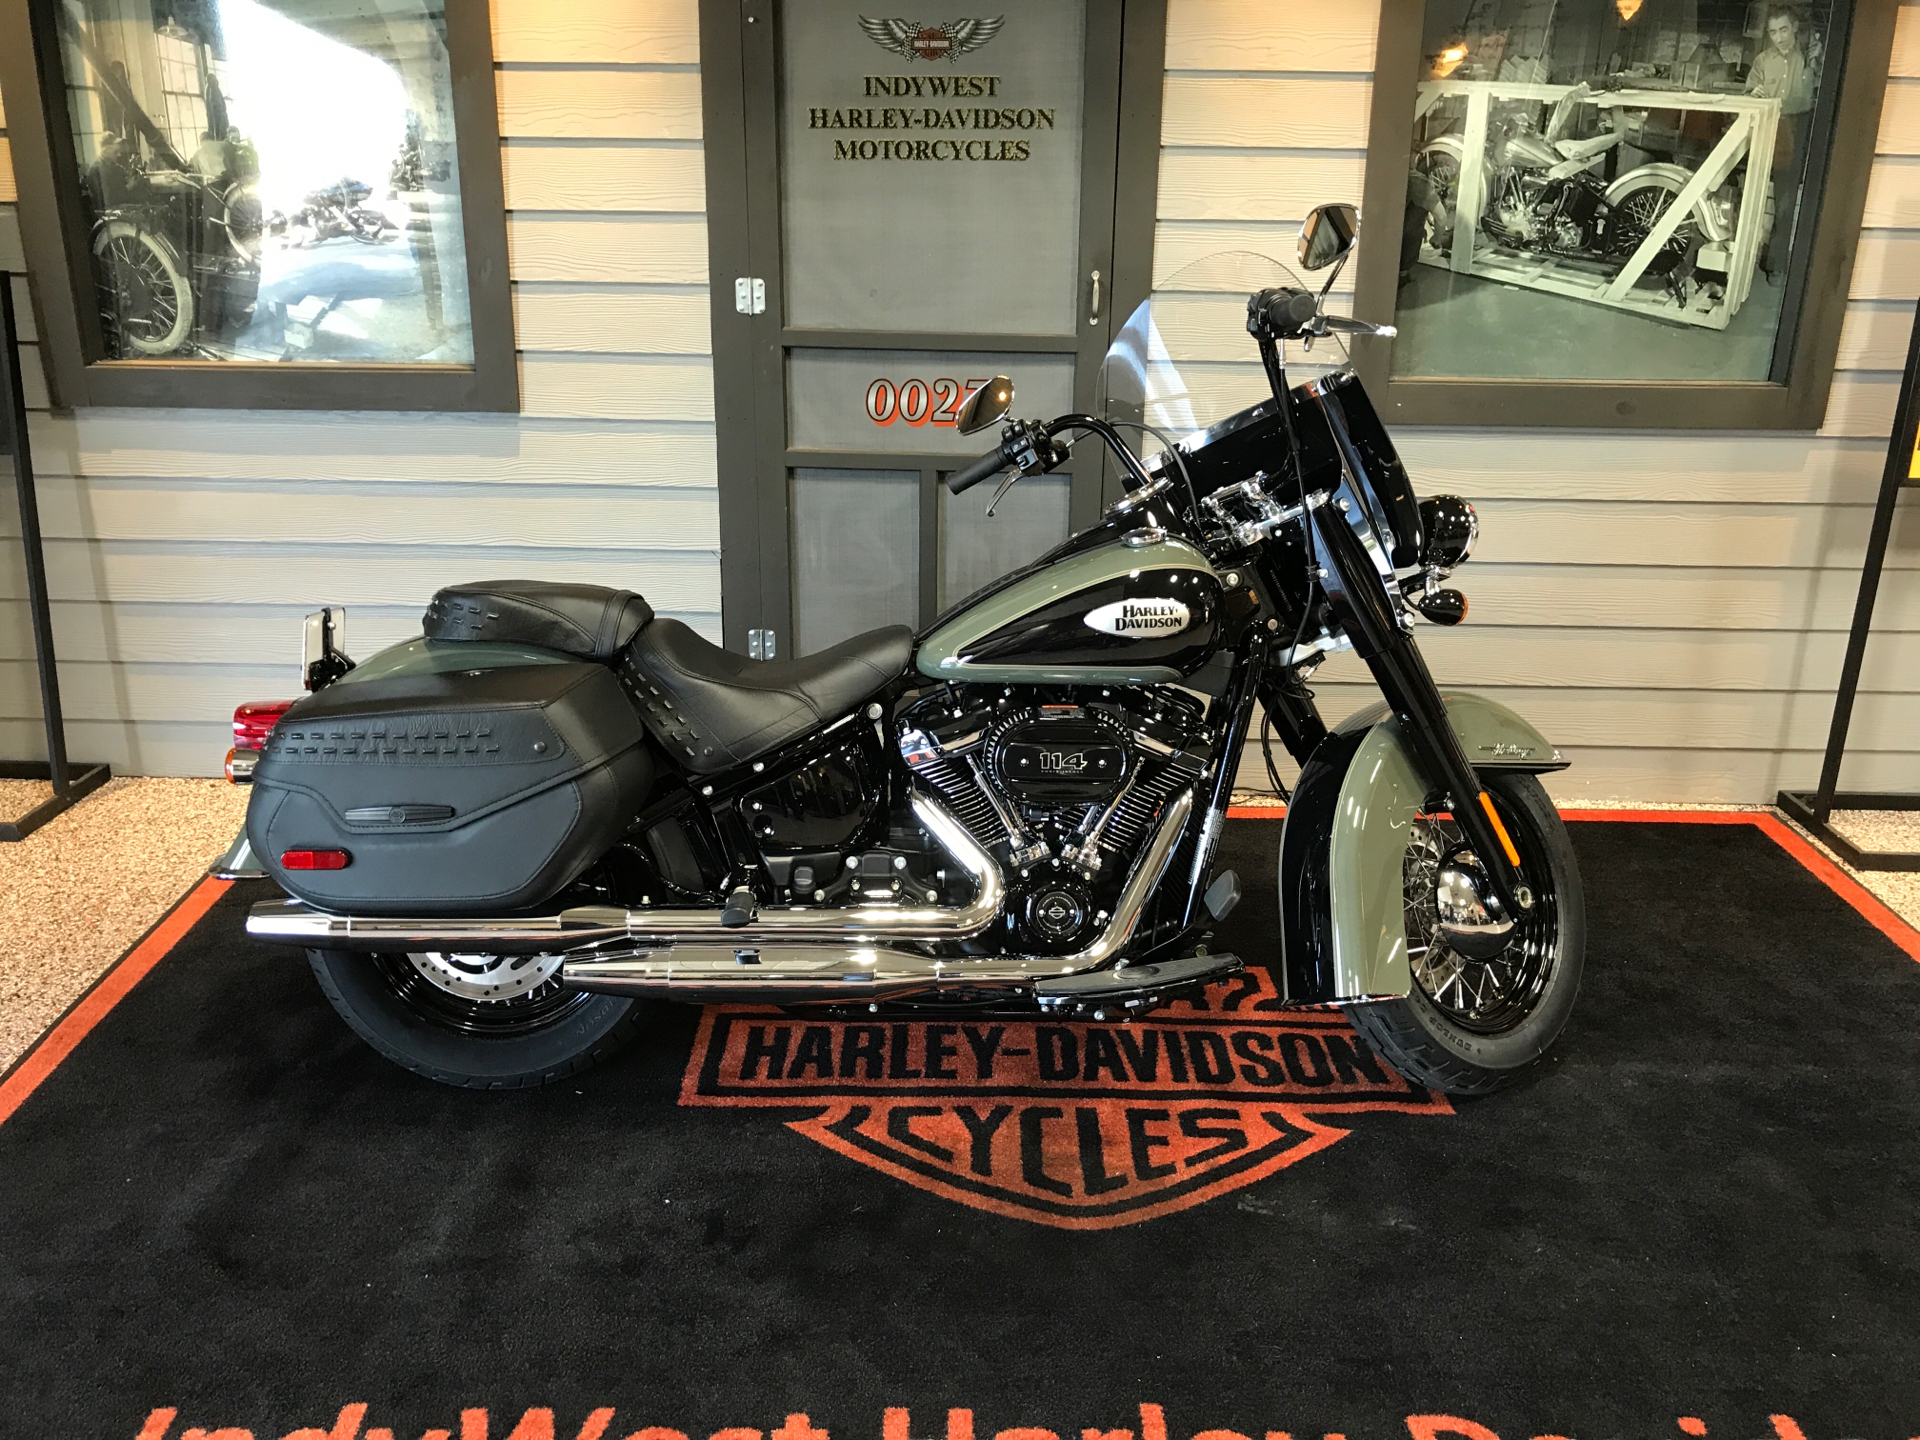 New 2021 Harley Davidson Heritage Classic 114 Deadwood Green Vivid Black Motorcycles In Plainfield In 062172